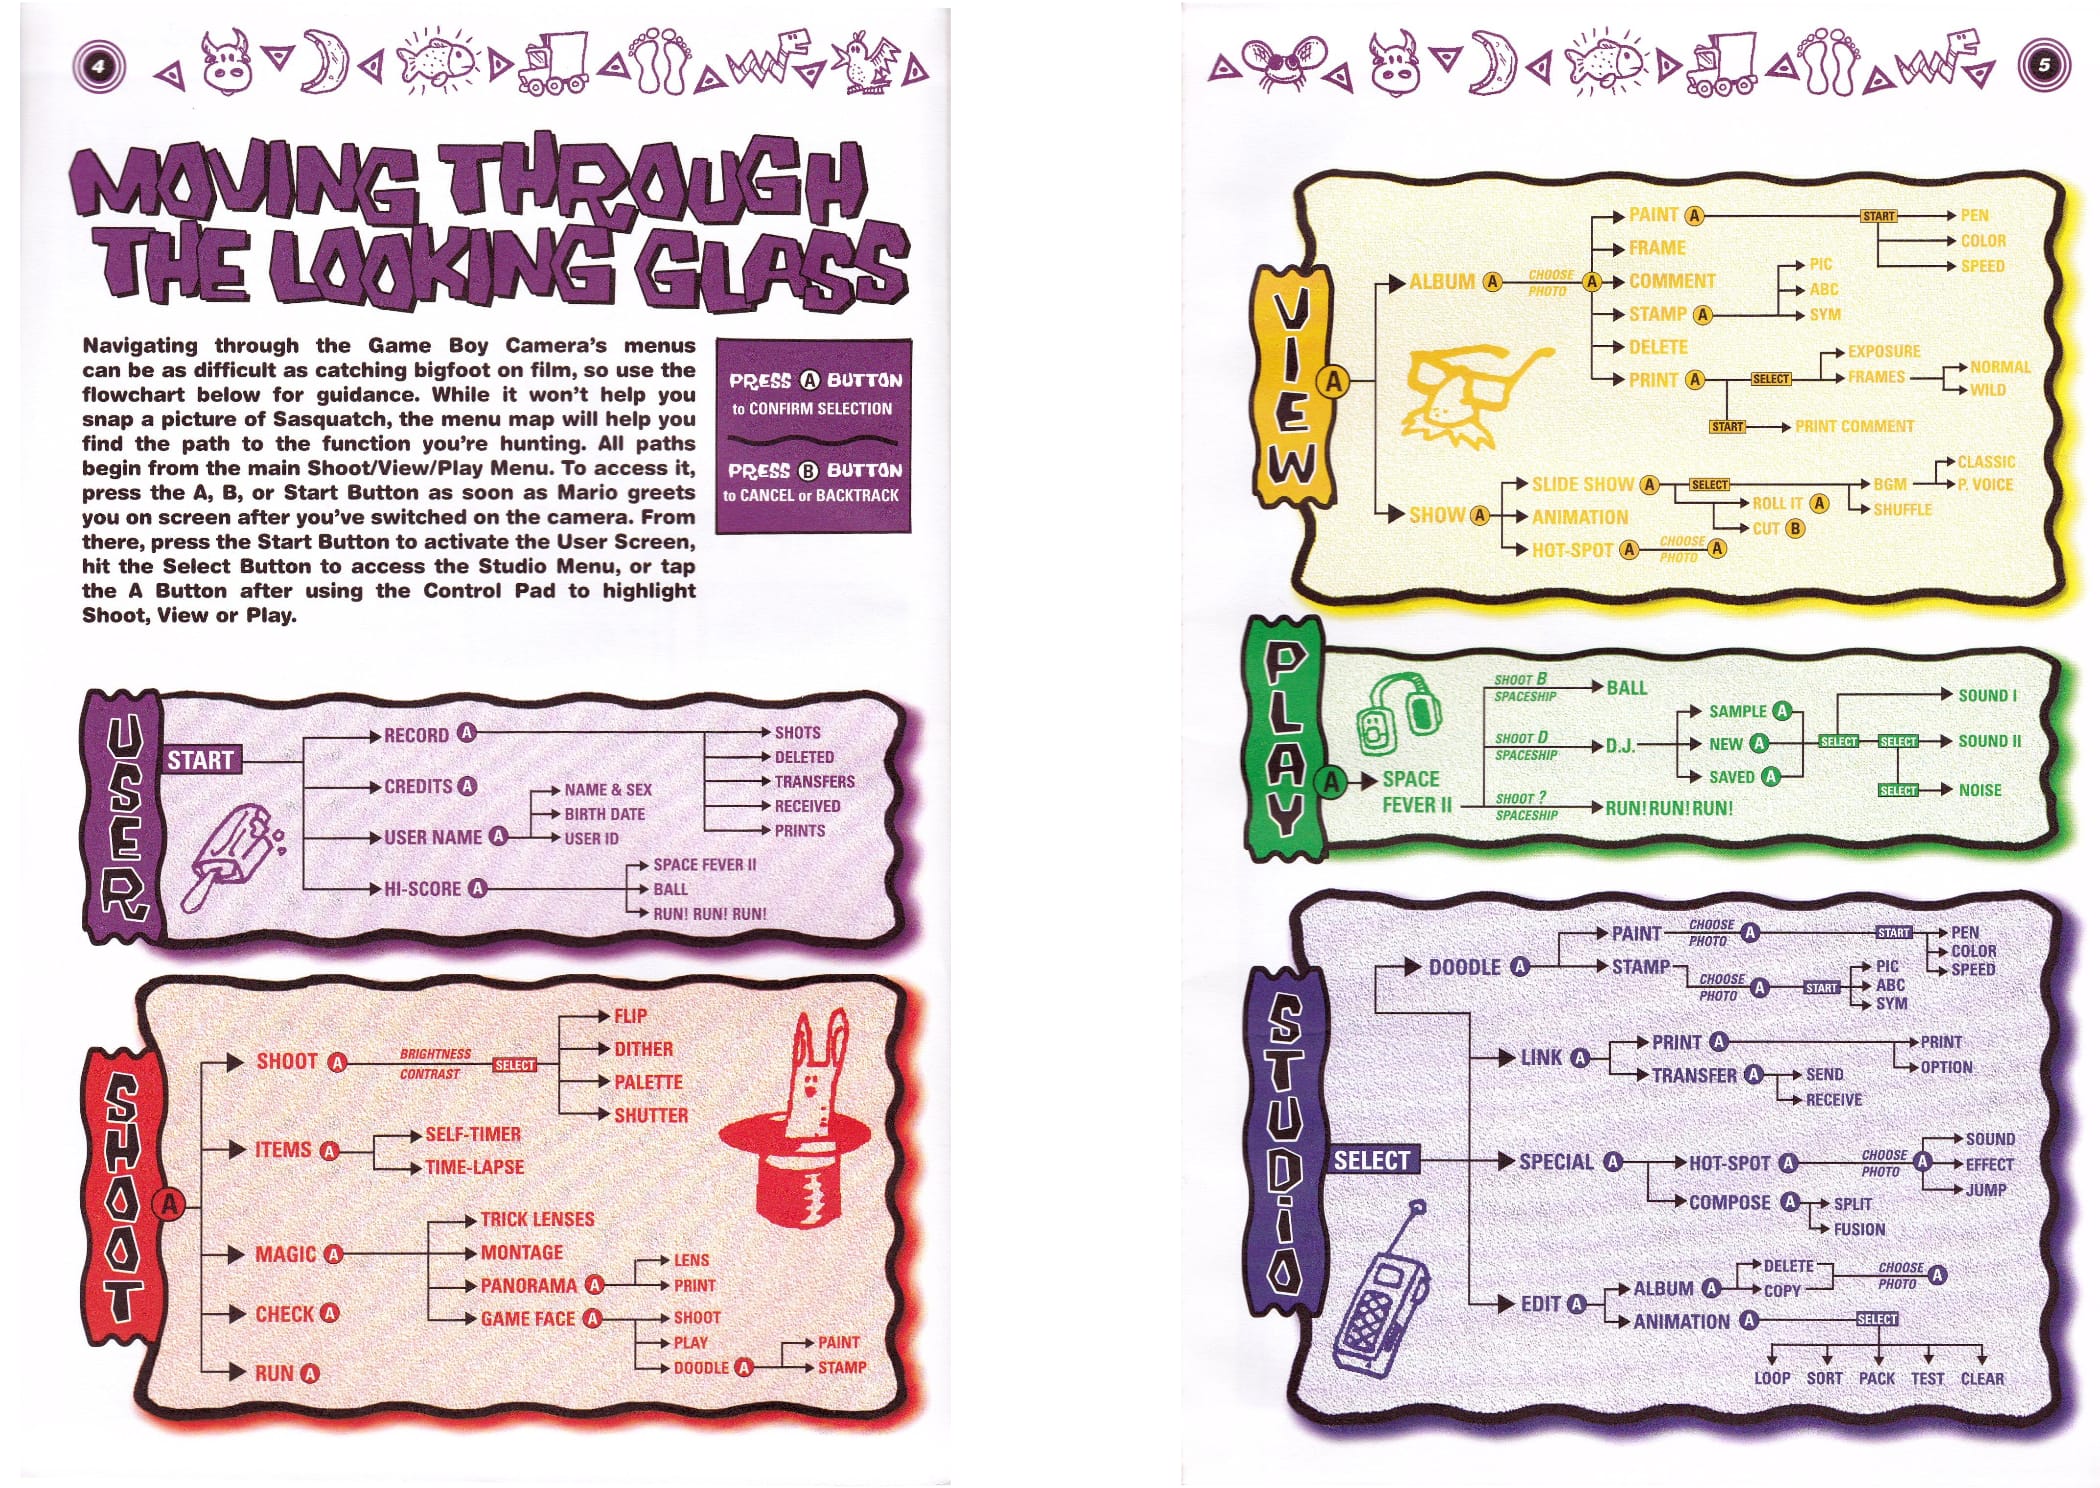 [The Nintendo Game Boy Camera Funtography Guide provides a full map of the software](https://archive.org/details/nintendofuntographyguide/page/n5/mode/2up).